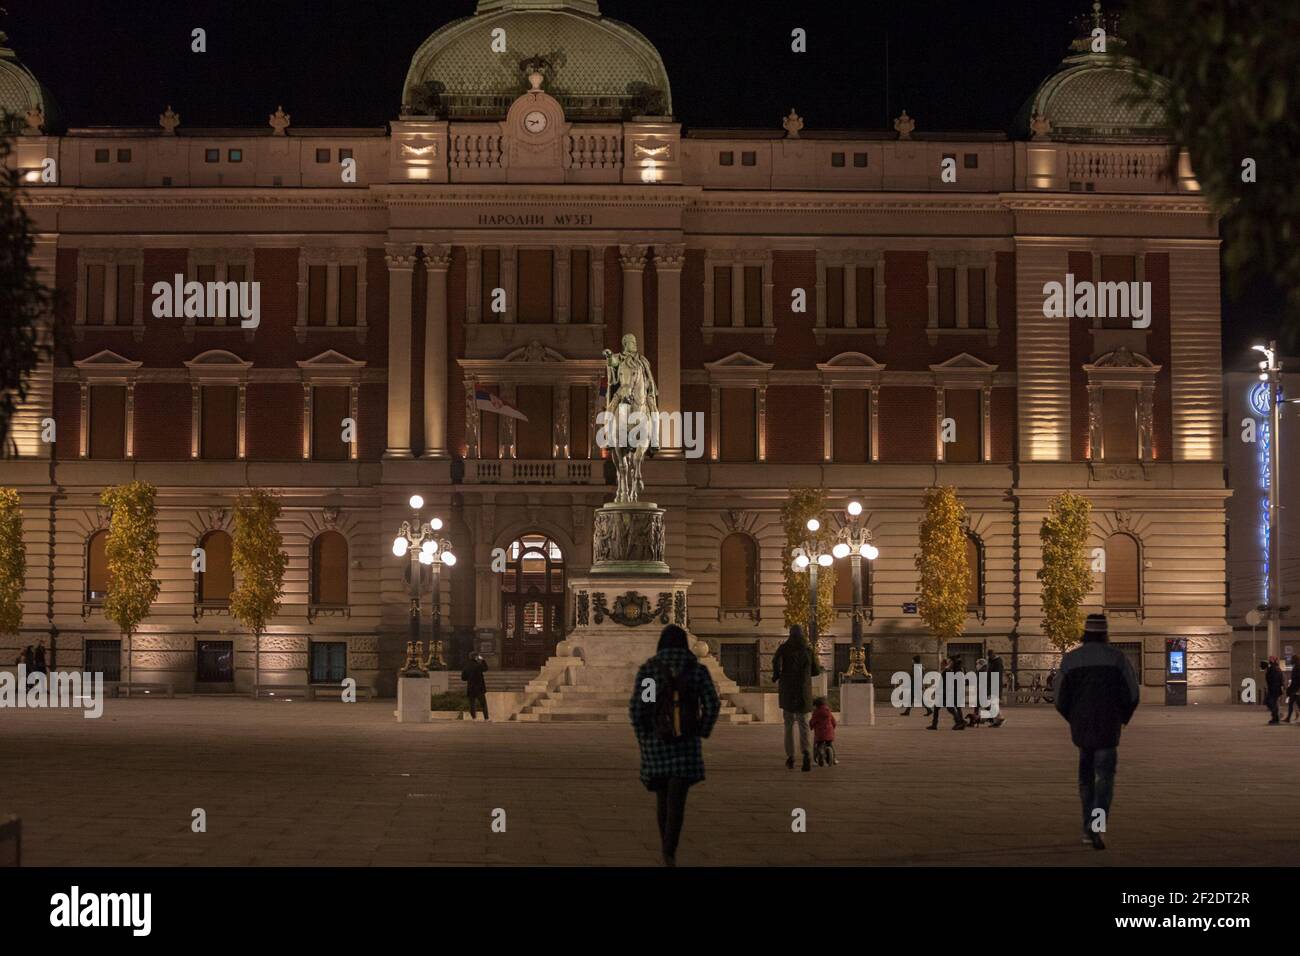 BELGRADE, SERBIA - DECEMBER 1, 2020: Selective blur over people on Trg Republike at night with Prince Mihailo (Knez Mihailo) statue and National Museu Stock Photo